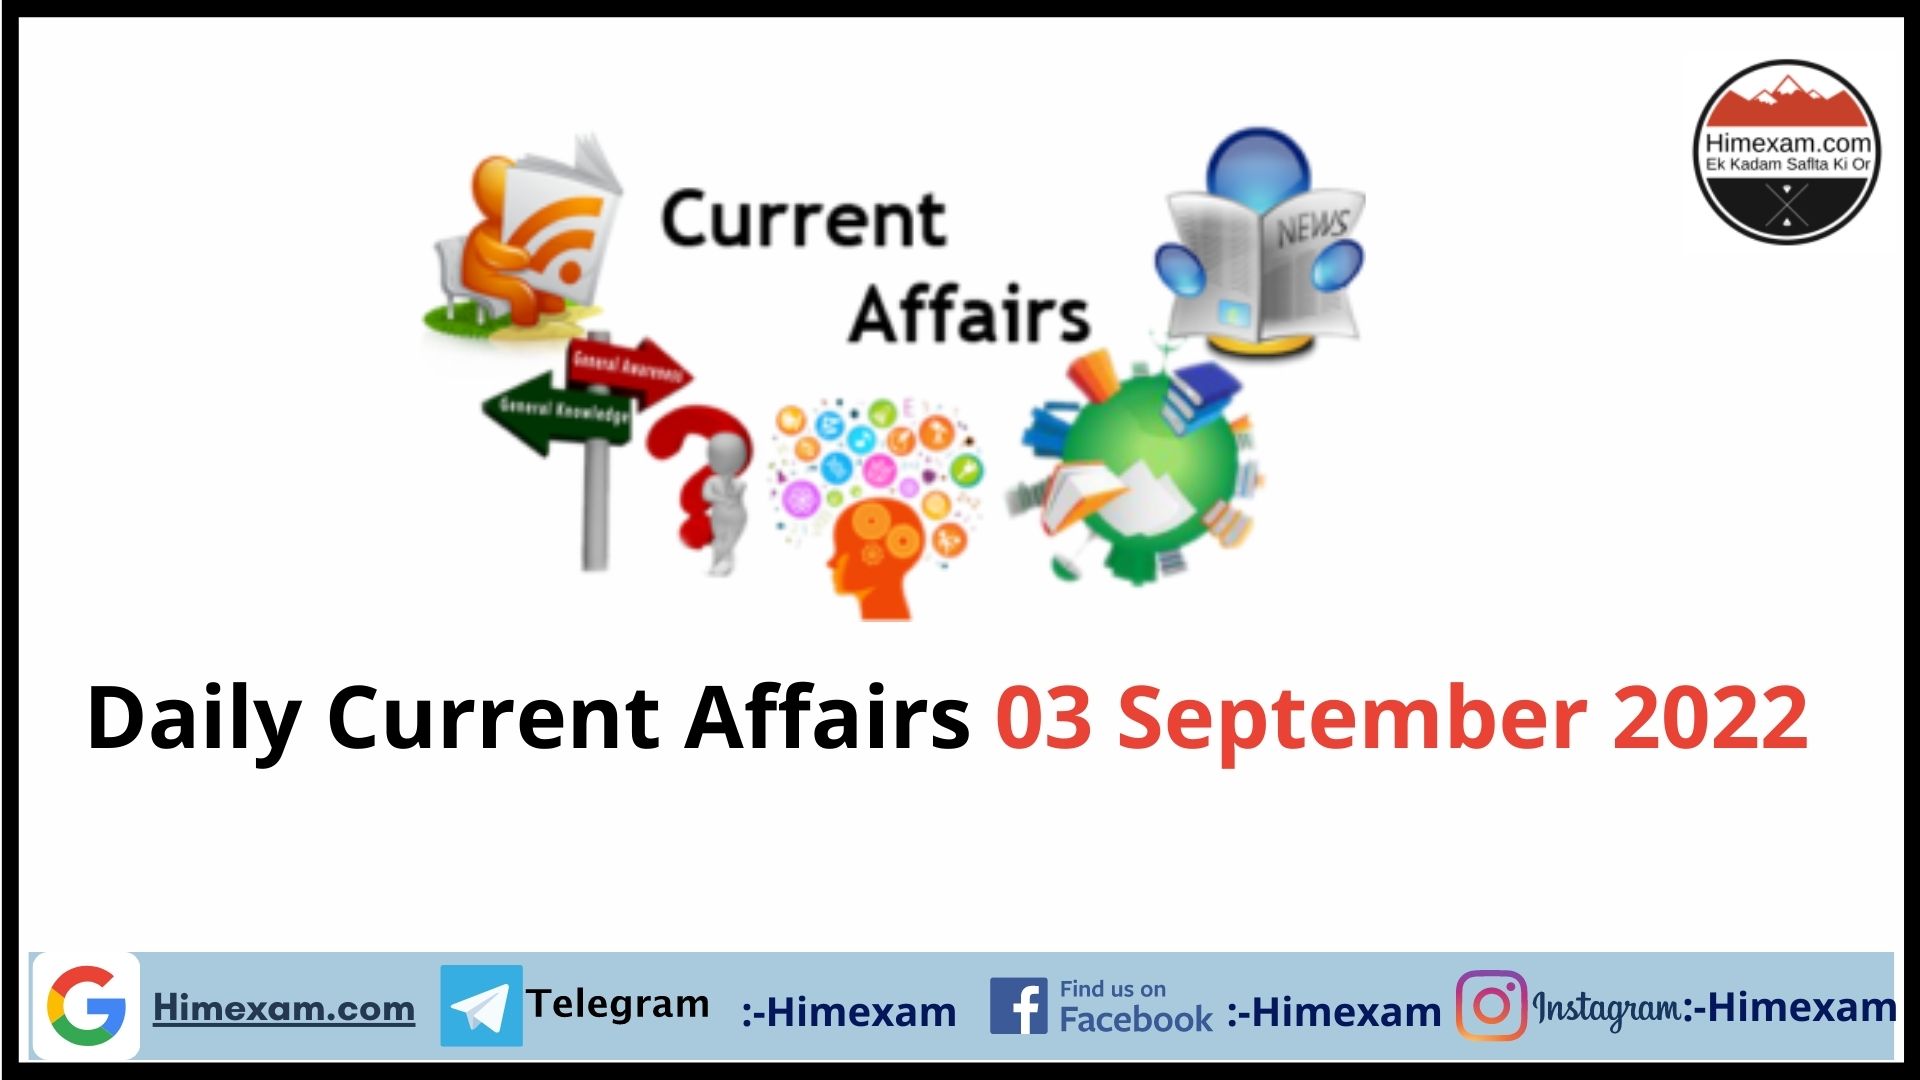 Daily Current Affairs 03 September 2022